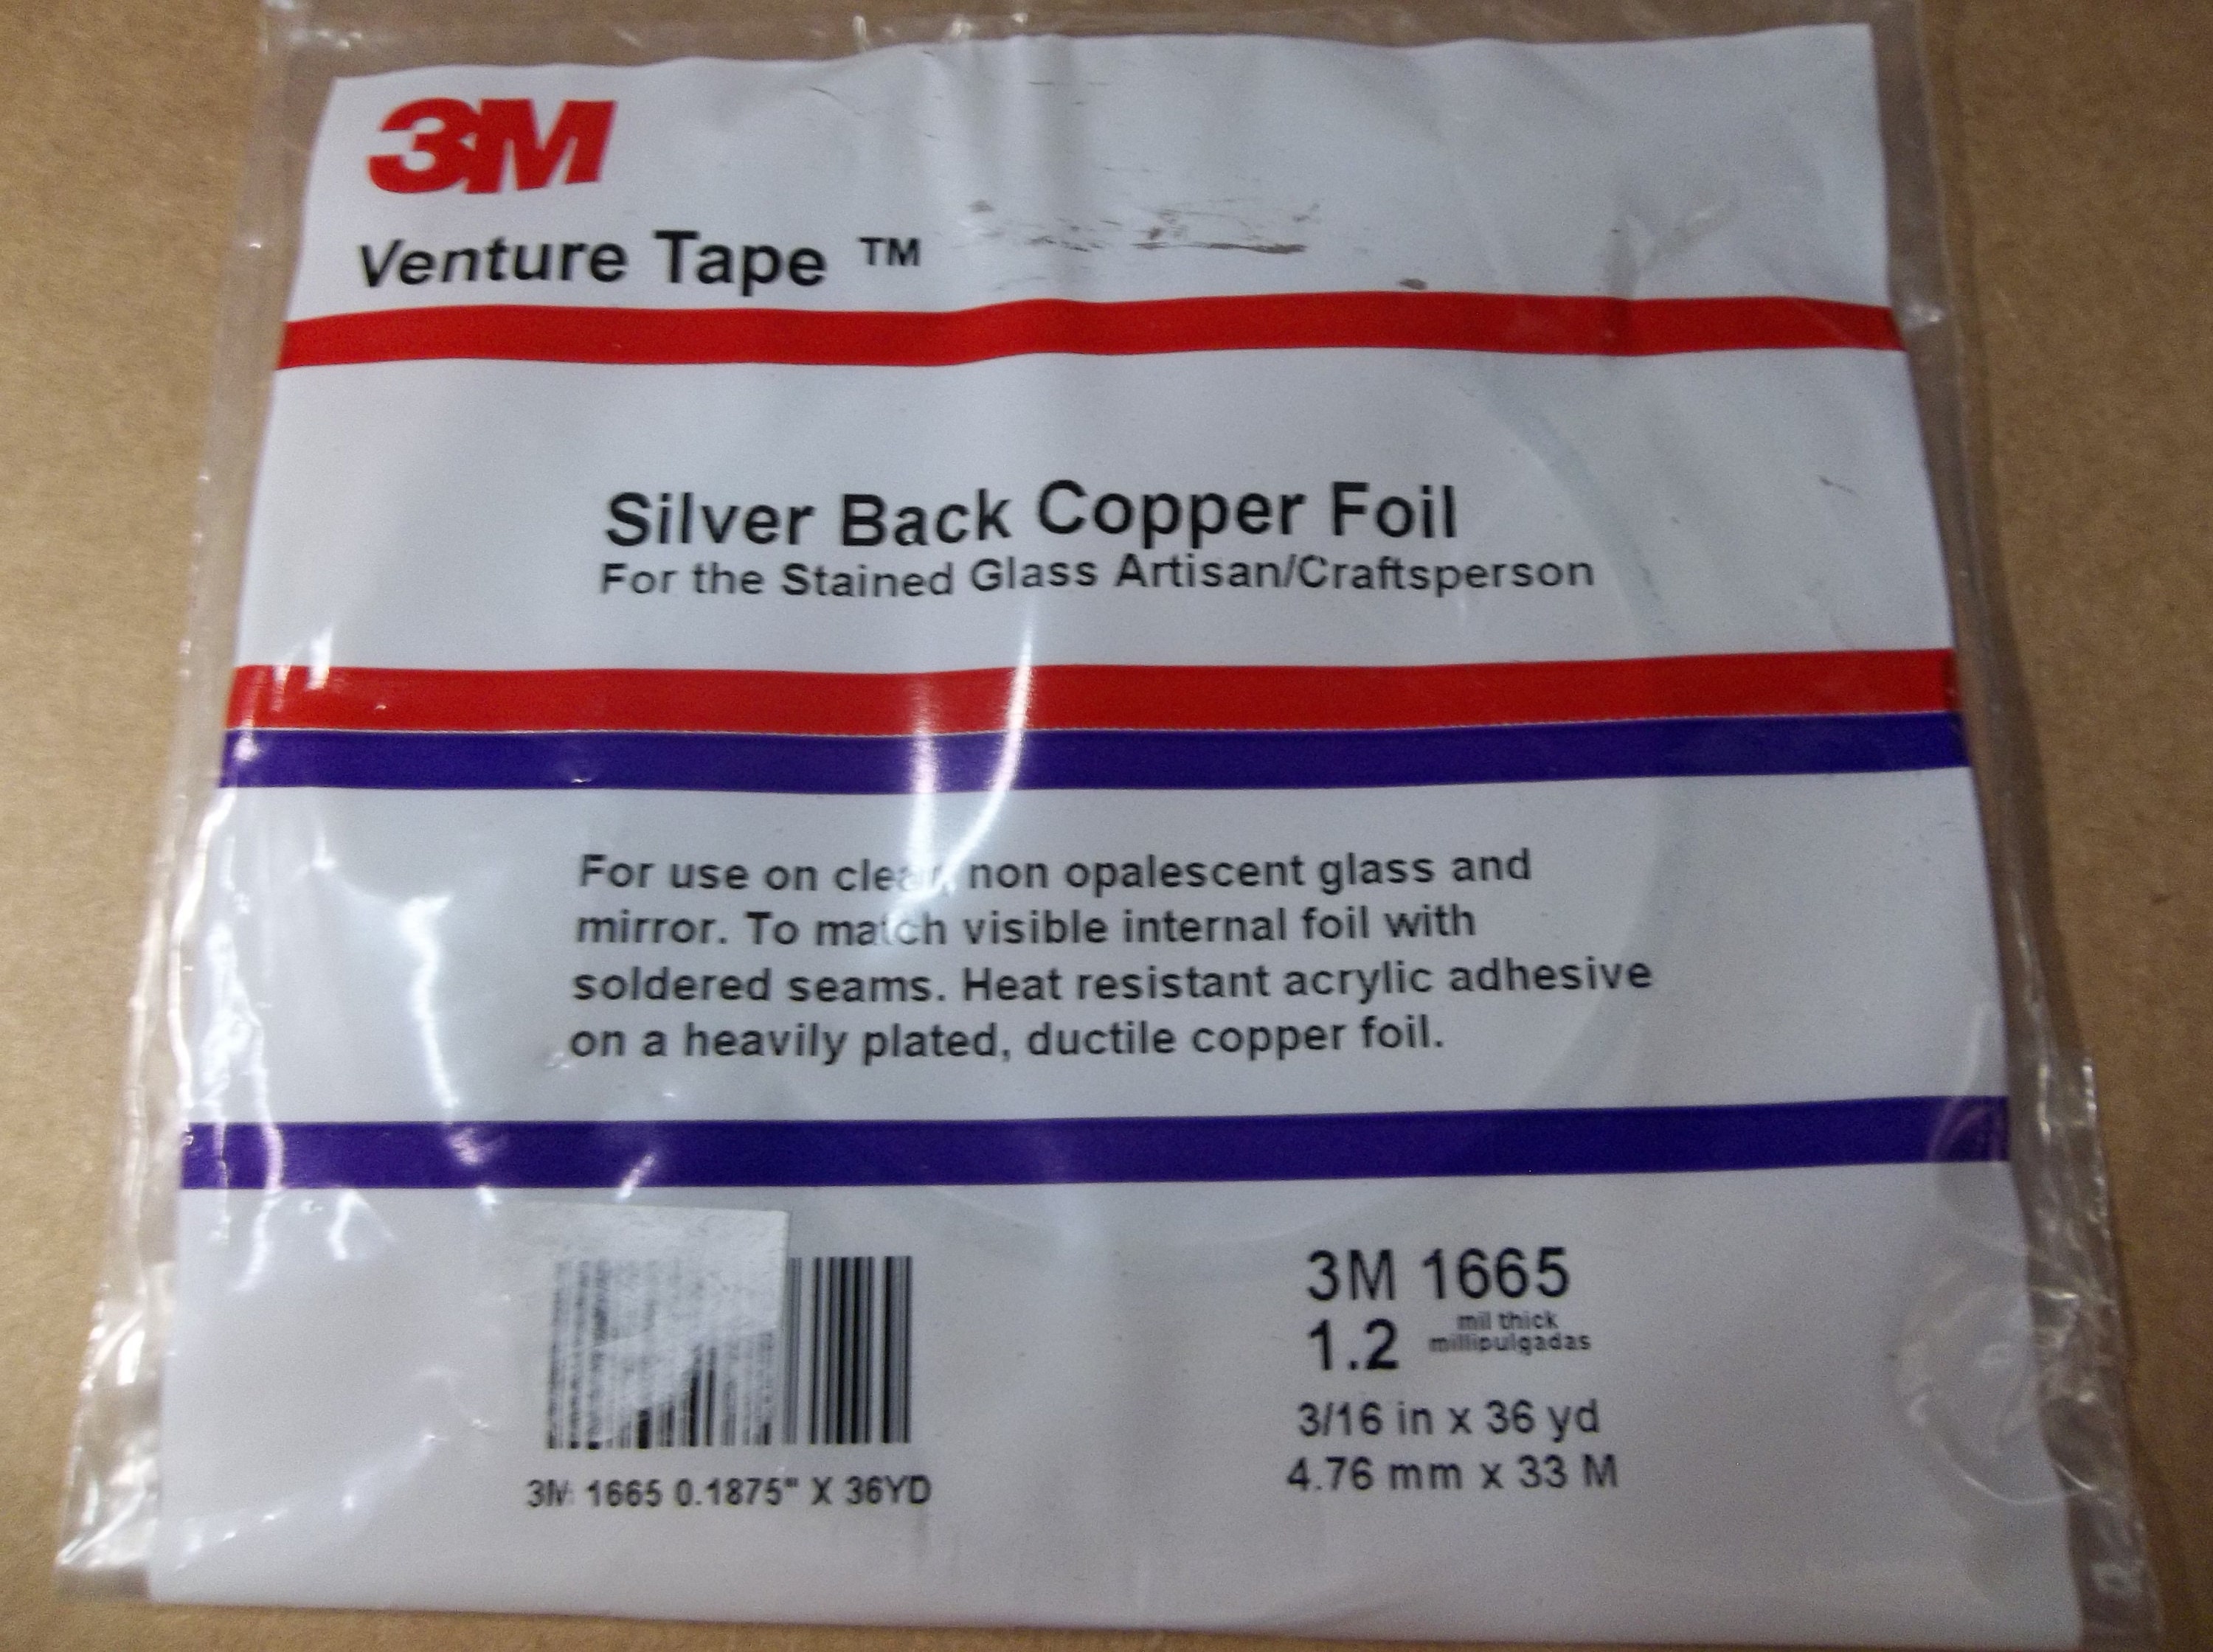 Copper Foil Silver Backed by Venture, 3/16 Inch Wide, 36 Yard Roll